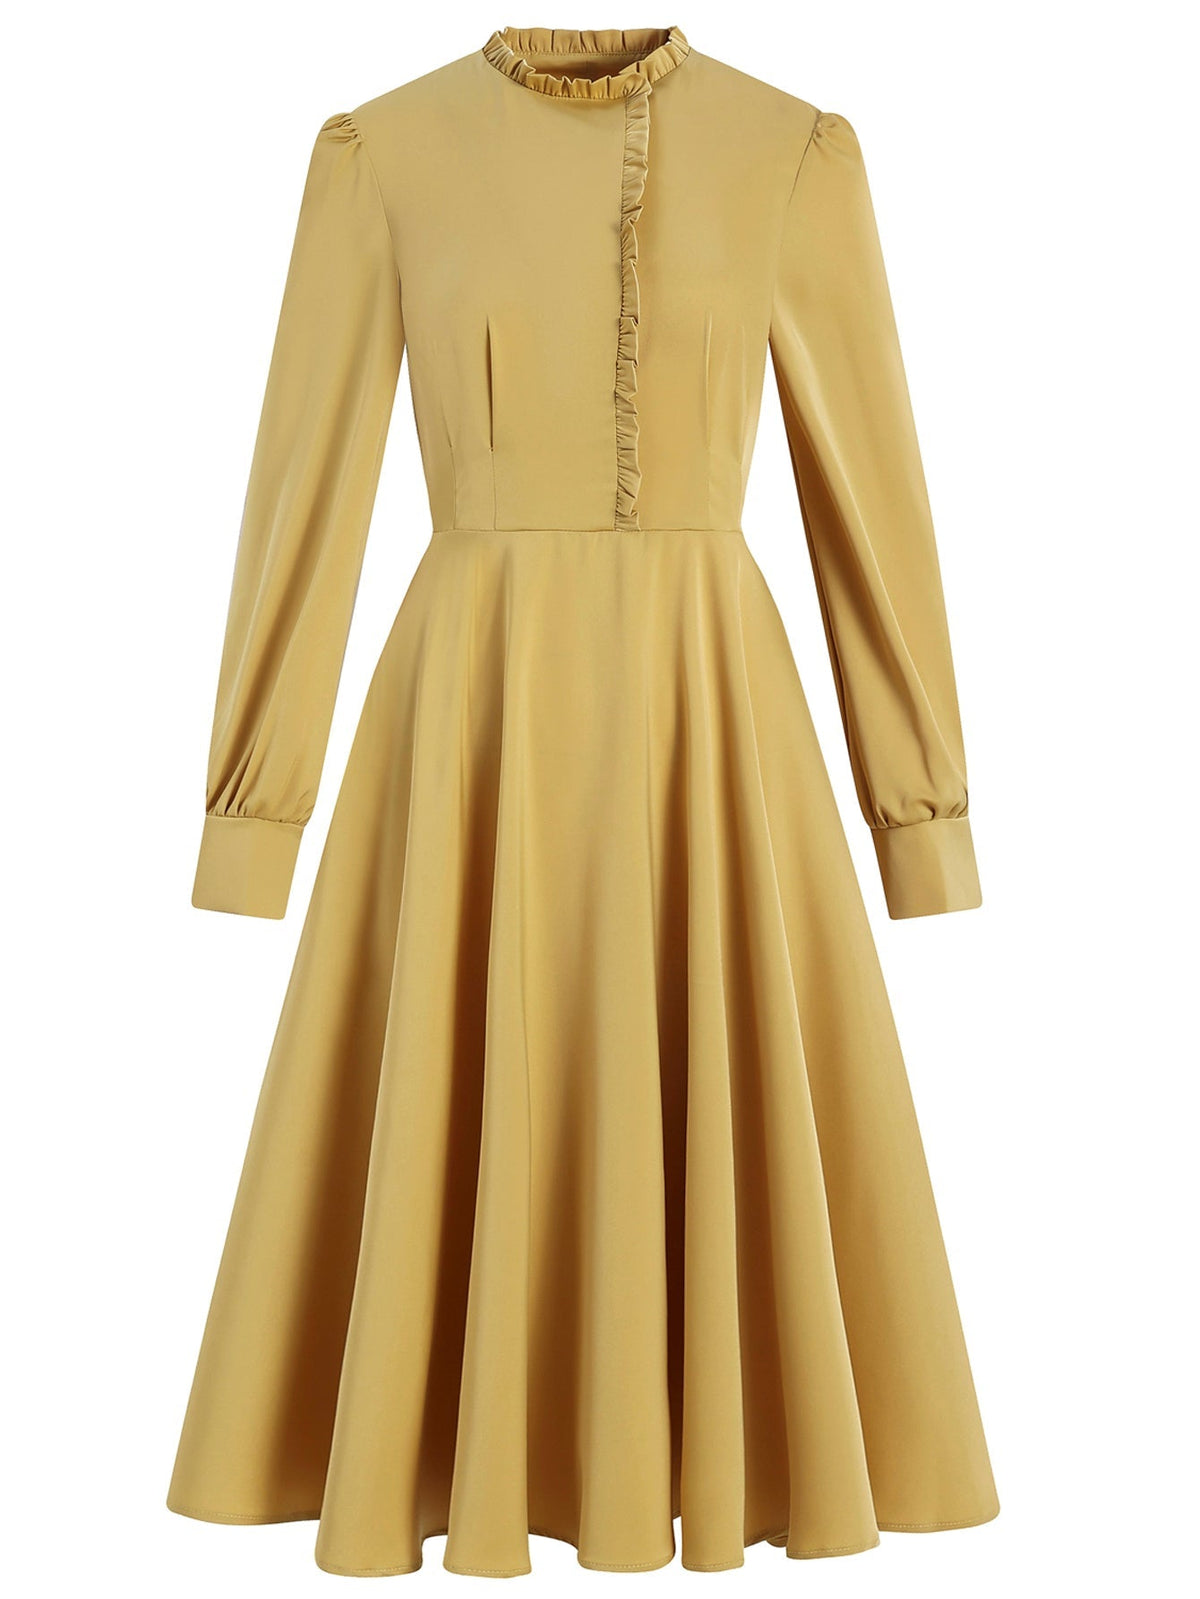 Vintage Pleated A-line Cocktail Party Swing Dress Sai Feel